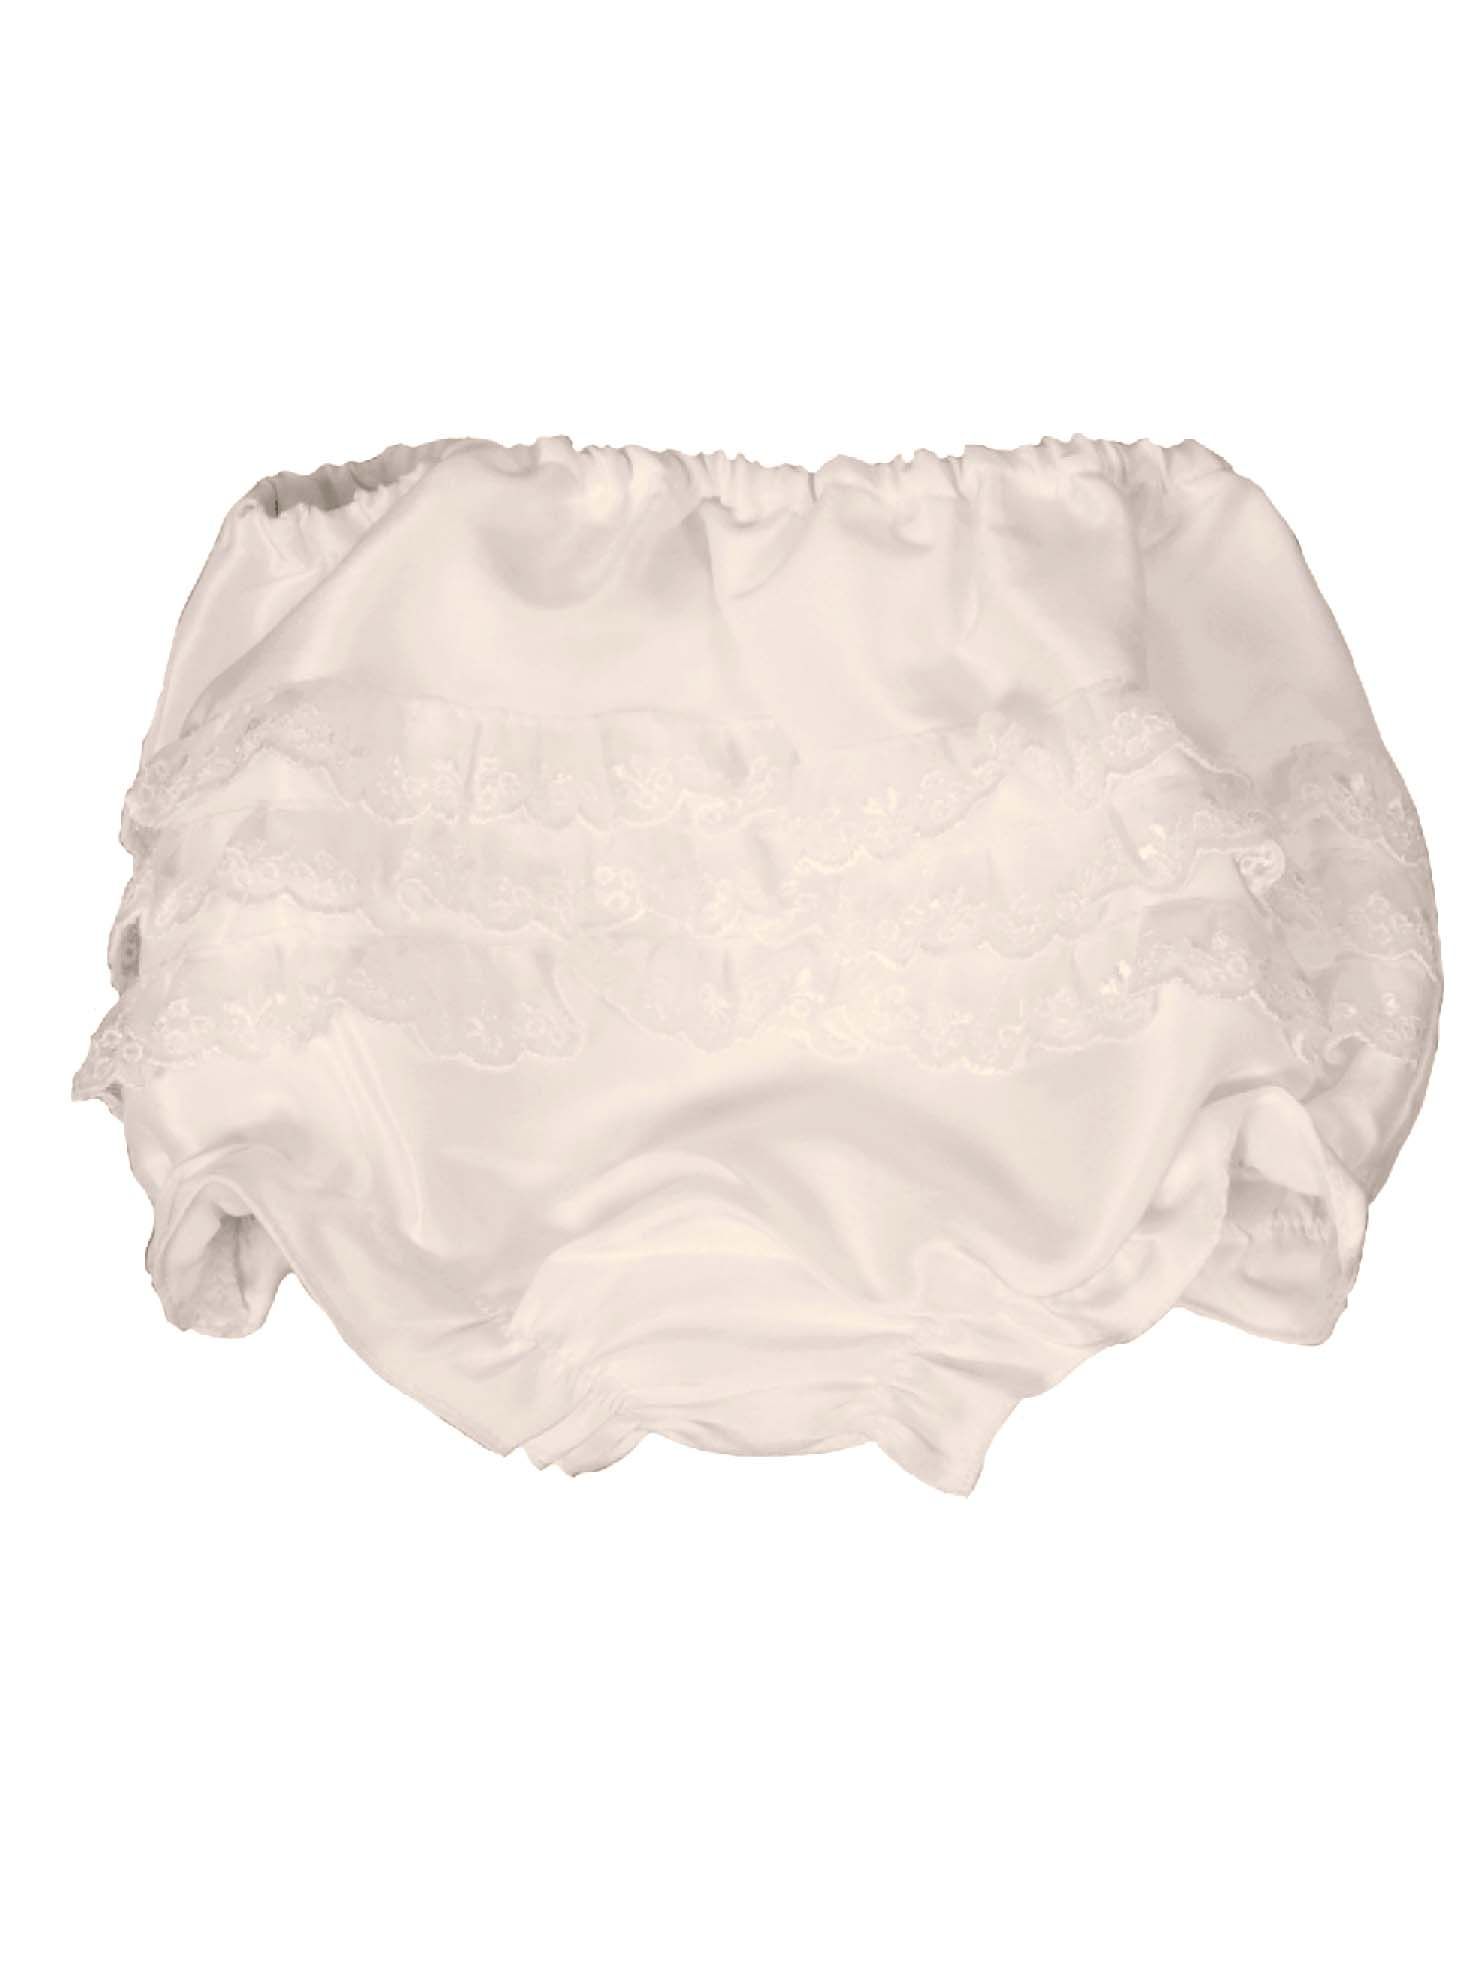 Who doesn't just love a cute pair of frilly knickers for their little one to cover the all important nappy.
Our style Antique White/Ivory XENA are made using our Mock Silk fabric to match our dresses. It's took us a long time to source this quality that even people in the industry mistake it for real silk!
The knickers are are lined in 100% lightweight cotton which is better against babies skin and good for any girl with sensitive skin.
They arrive with you in an organza gift bag so you can keep them and the delicate lace protected for future use. White knickers can be used again and again under all their party dresses.
Outer - 100% polyester
Lining - 100% cotton
Dry Clean or Hand Wash